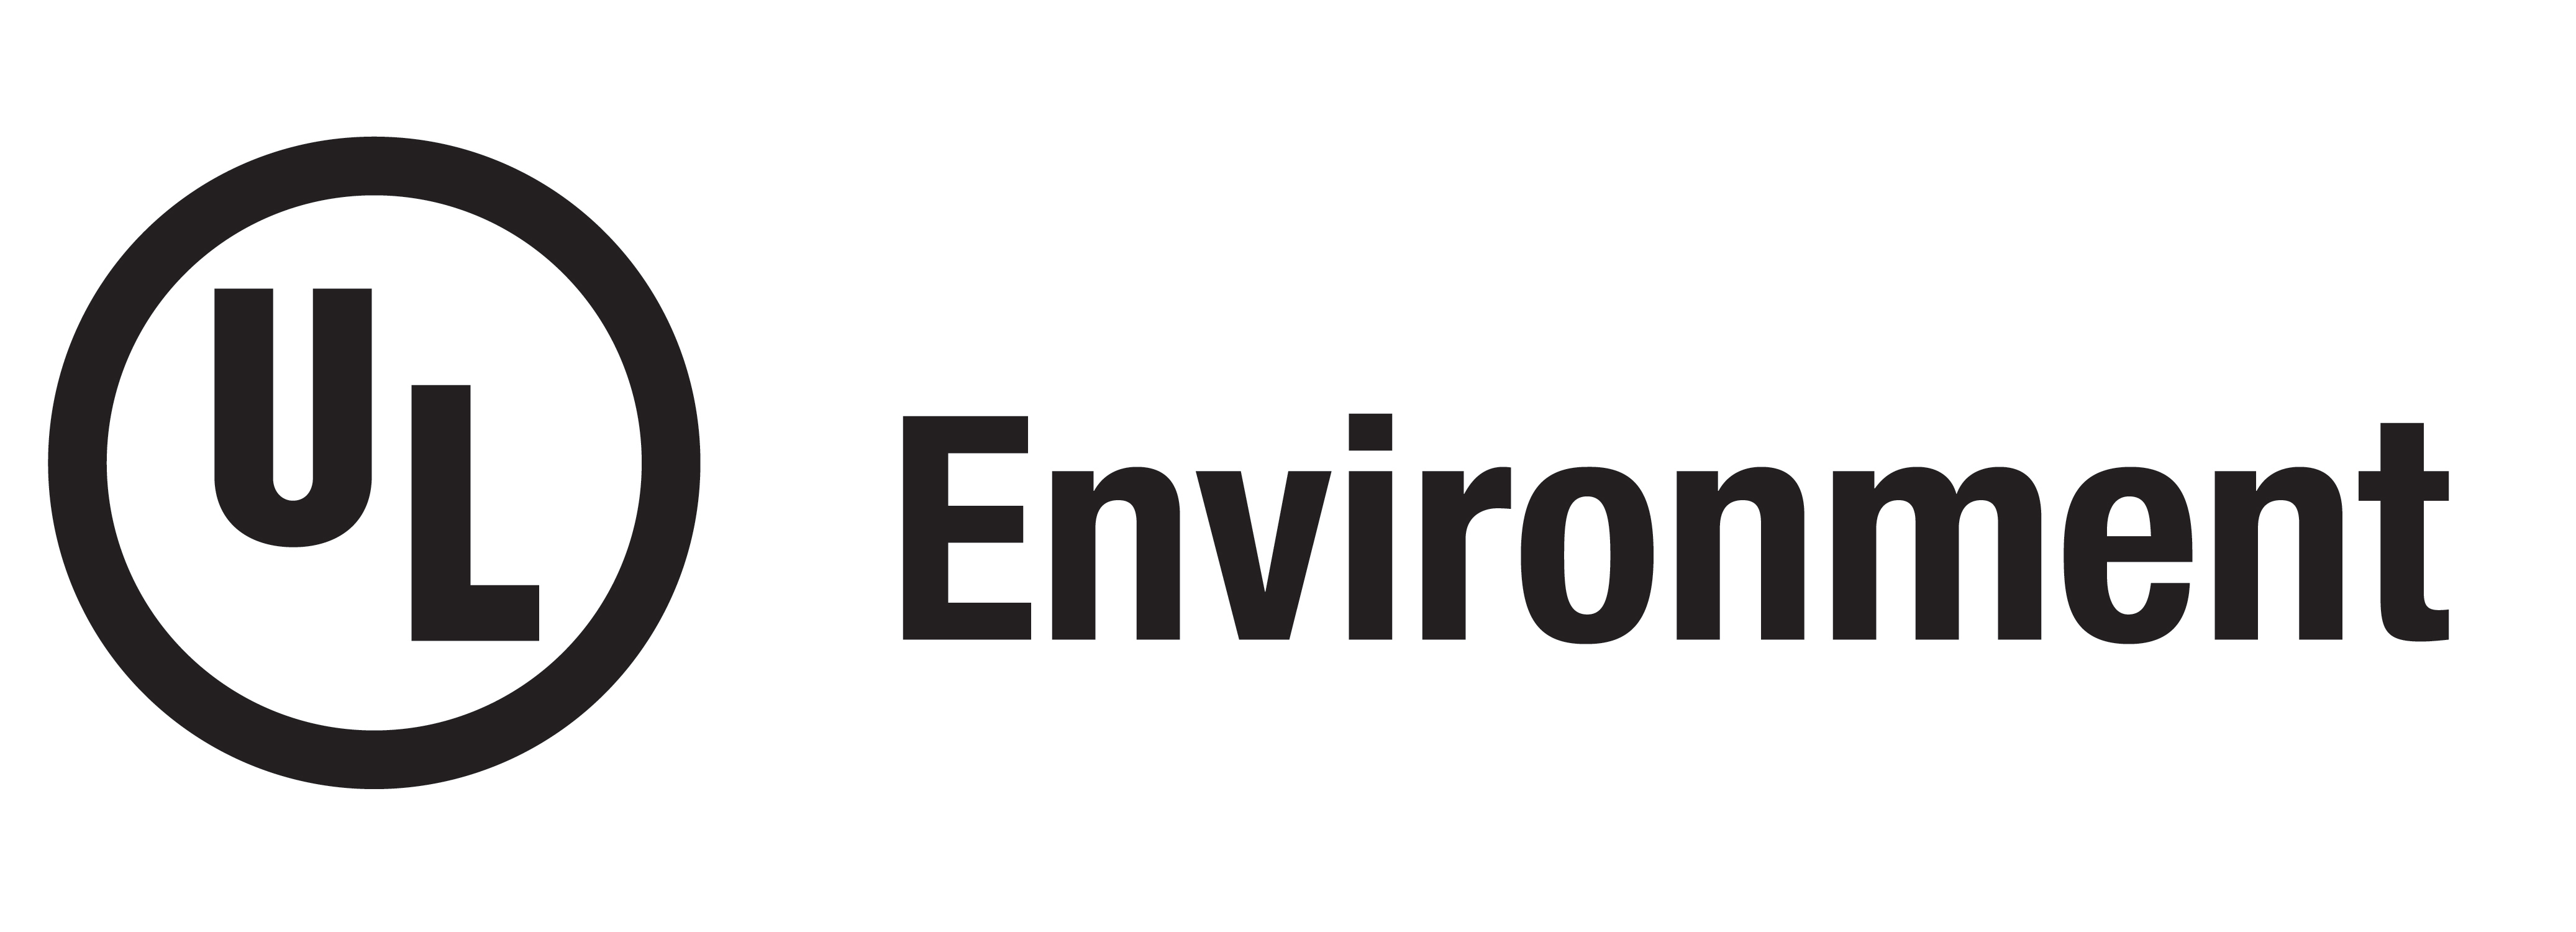 UL Environment Publishes First Global Product Category Rule (PCR) |  Business Wire